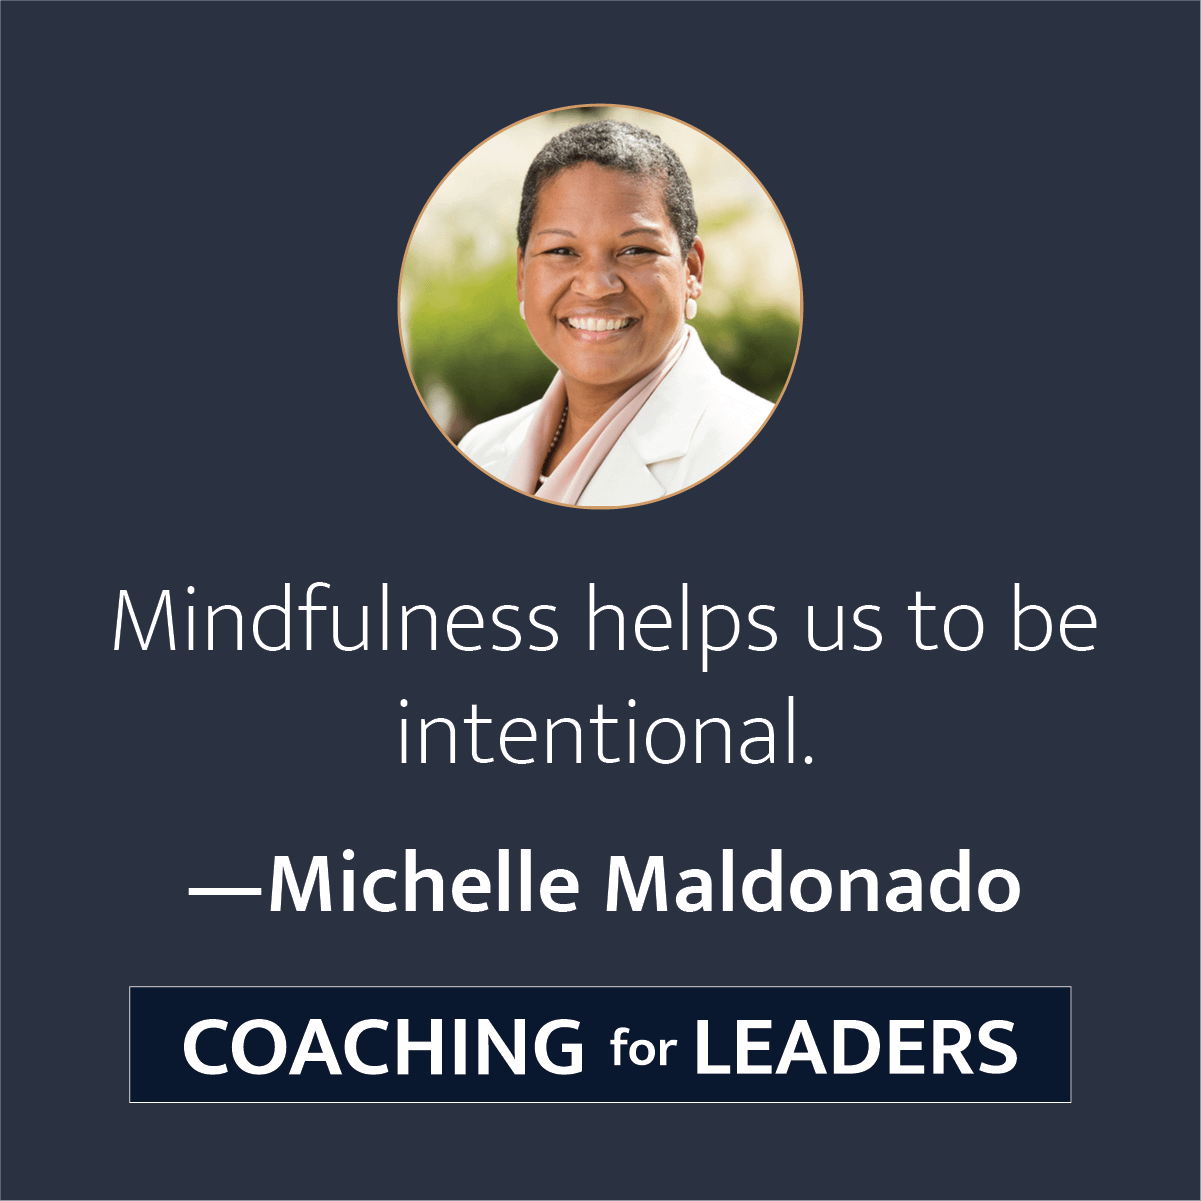 Mindfulness helps us to be intentional.